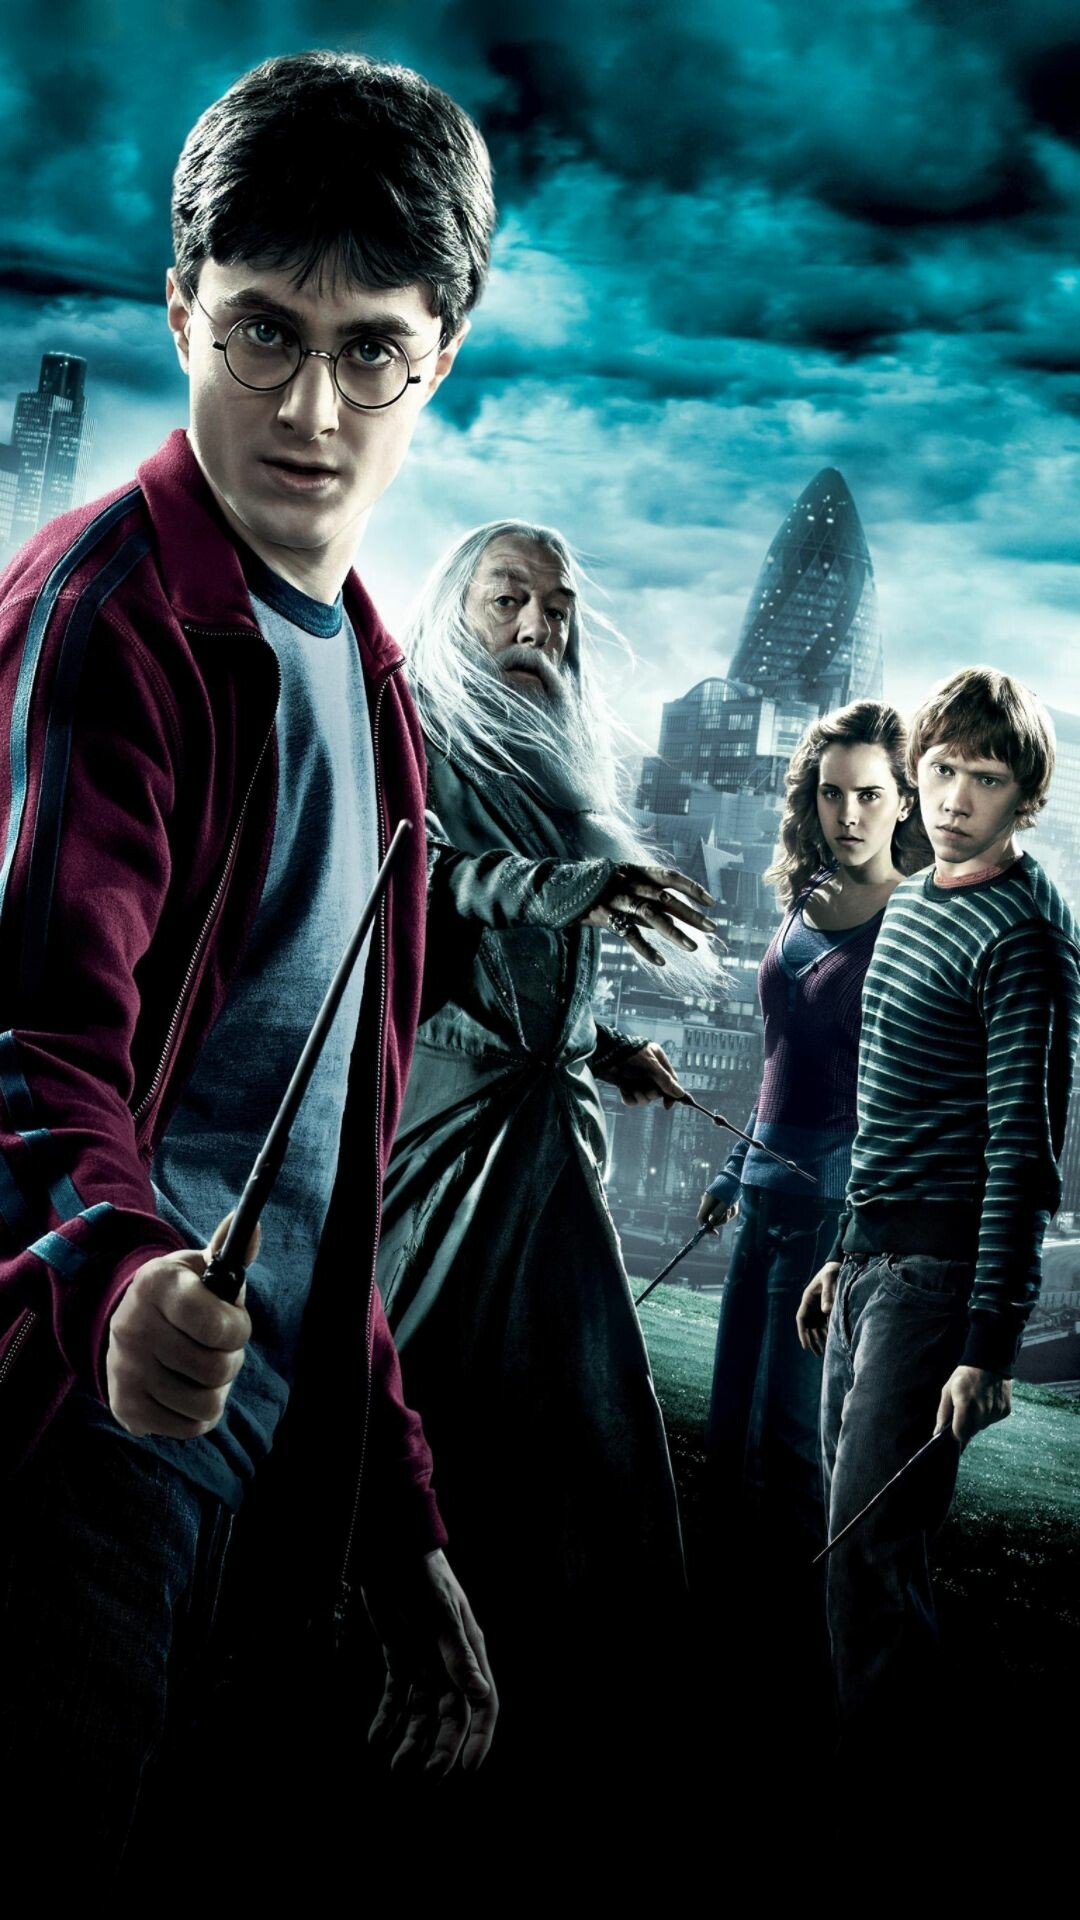 Harry Potter: An 11-year-old boy who comes to find out that he is a wizard. 1080x1920 Full HD Background.